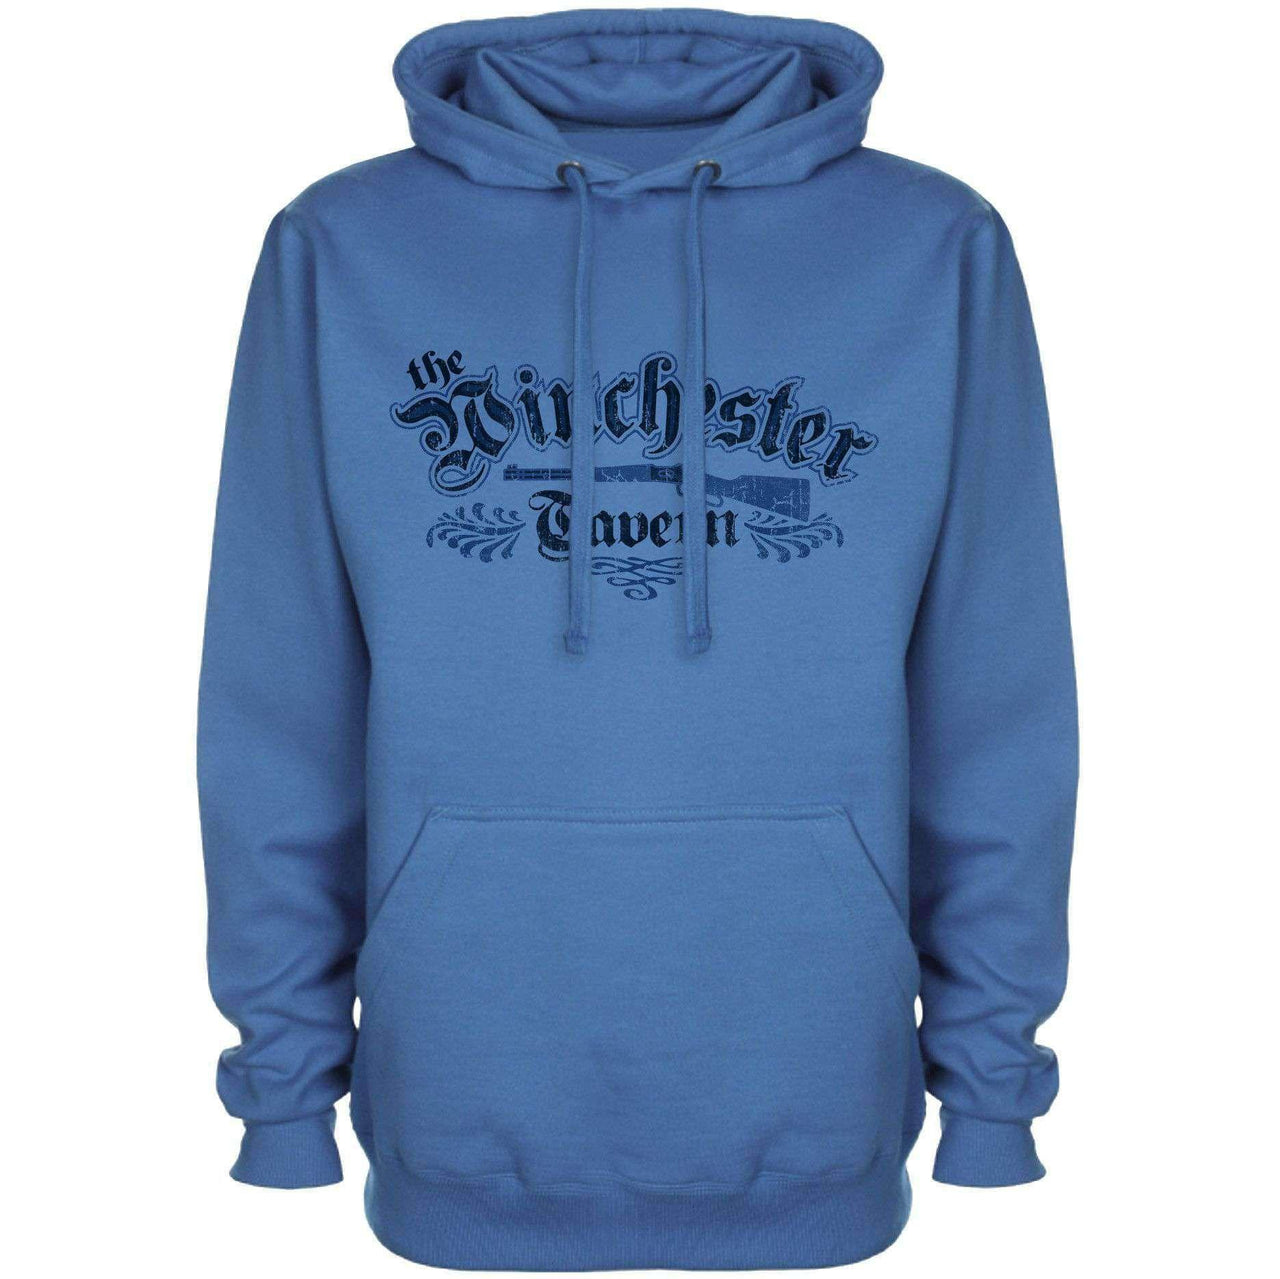 The Winchester Tavern Hoodie For Men and Women 8Ball